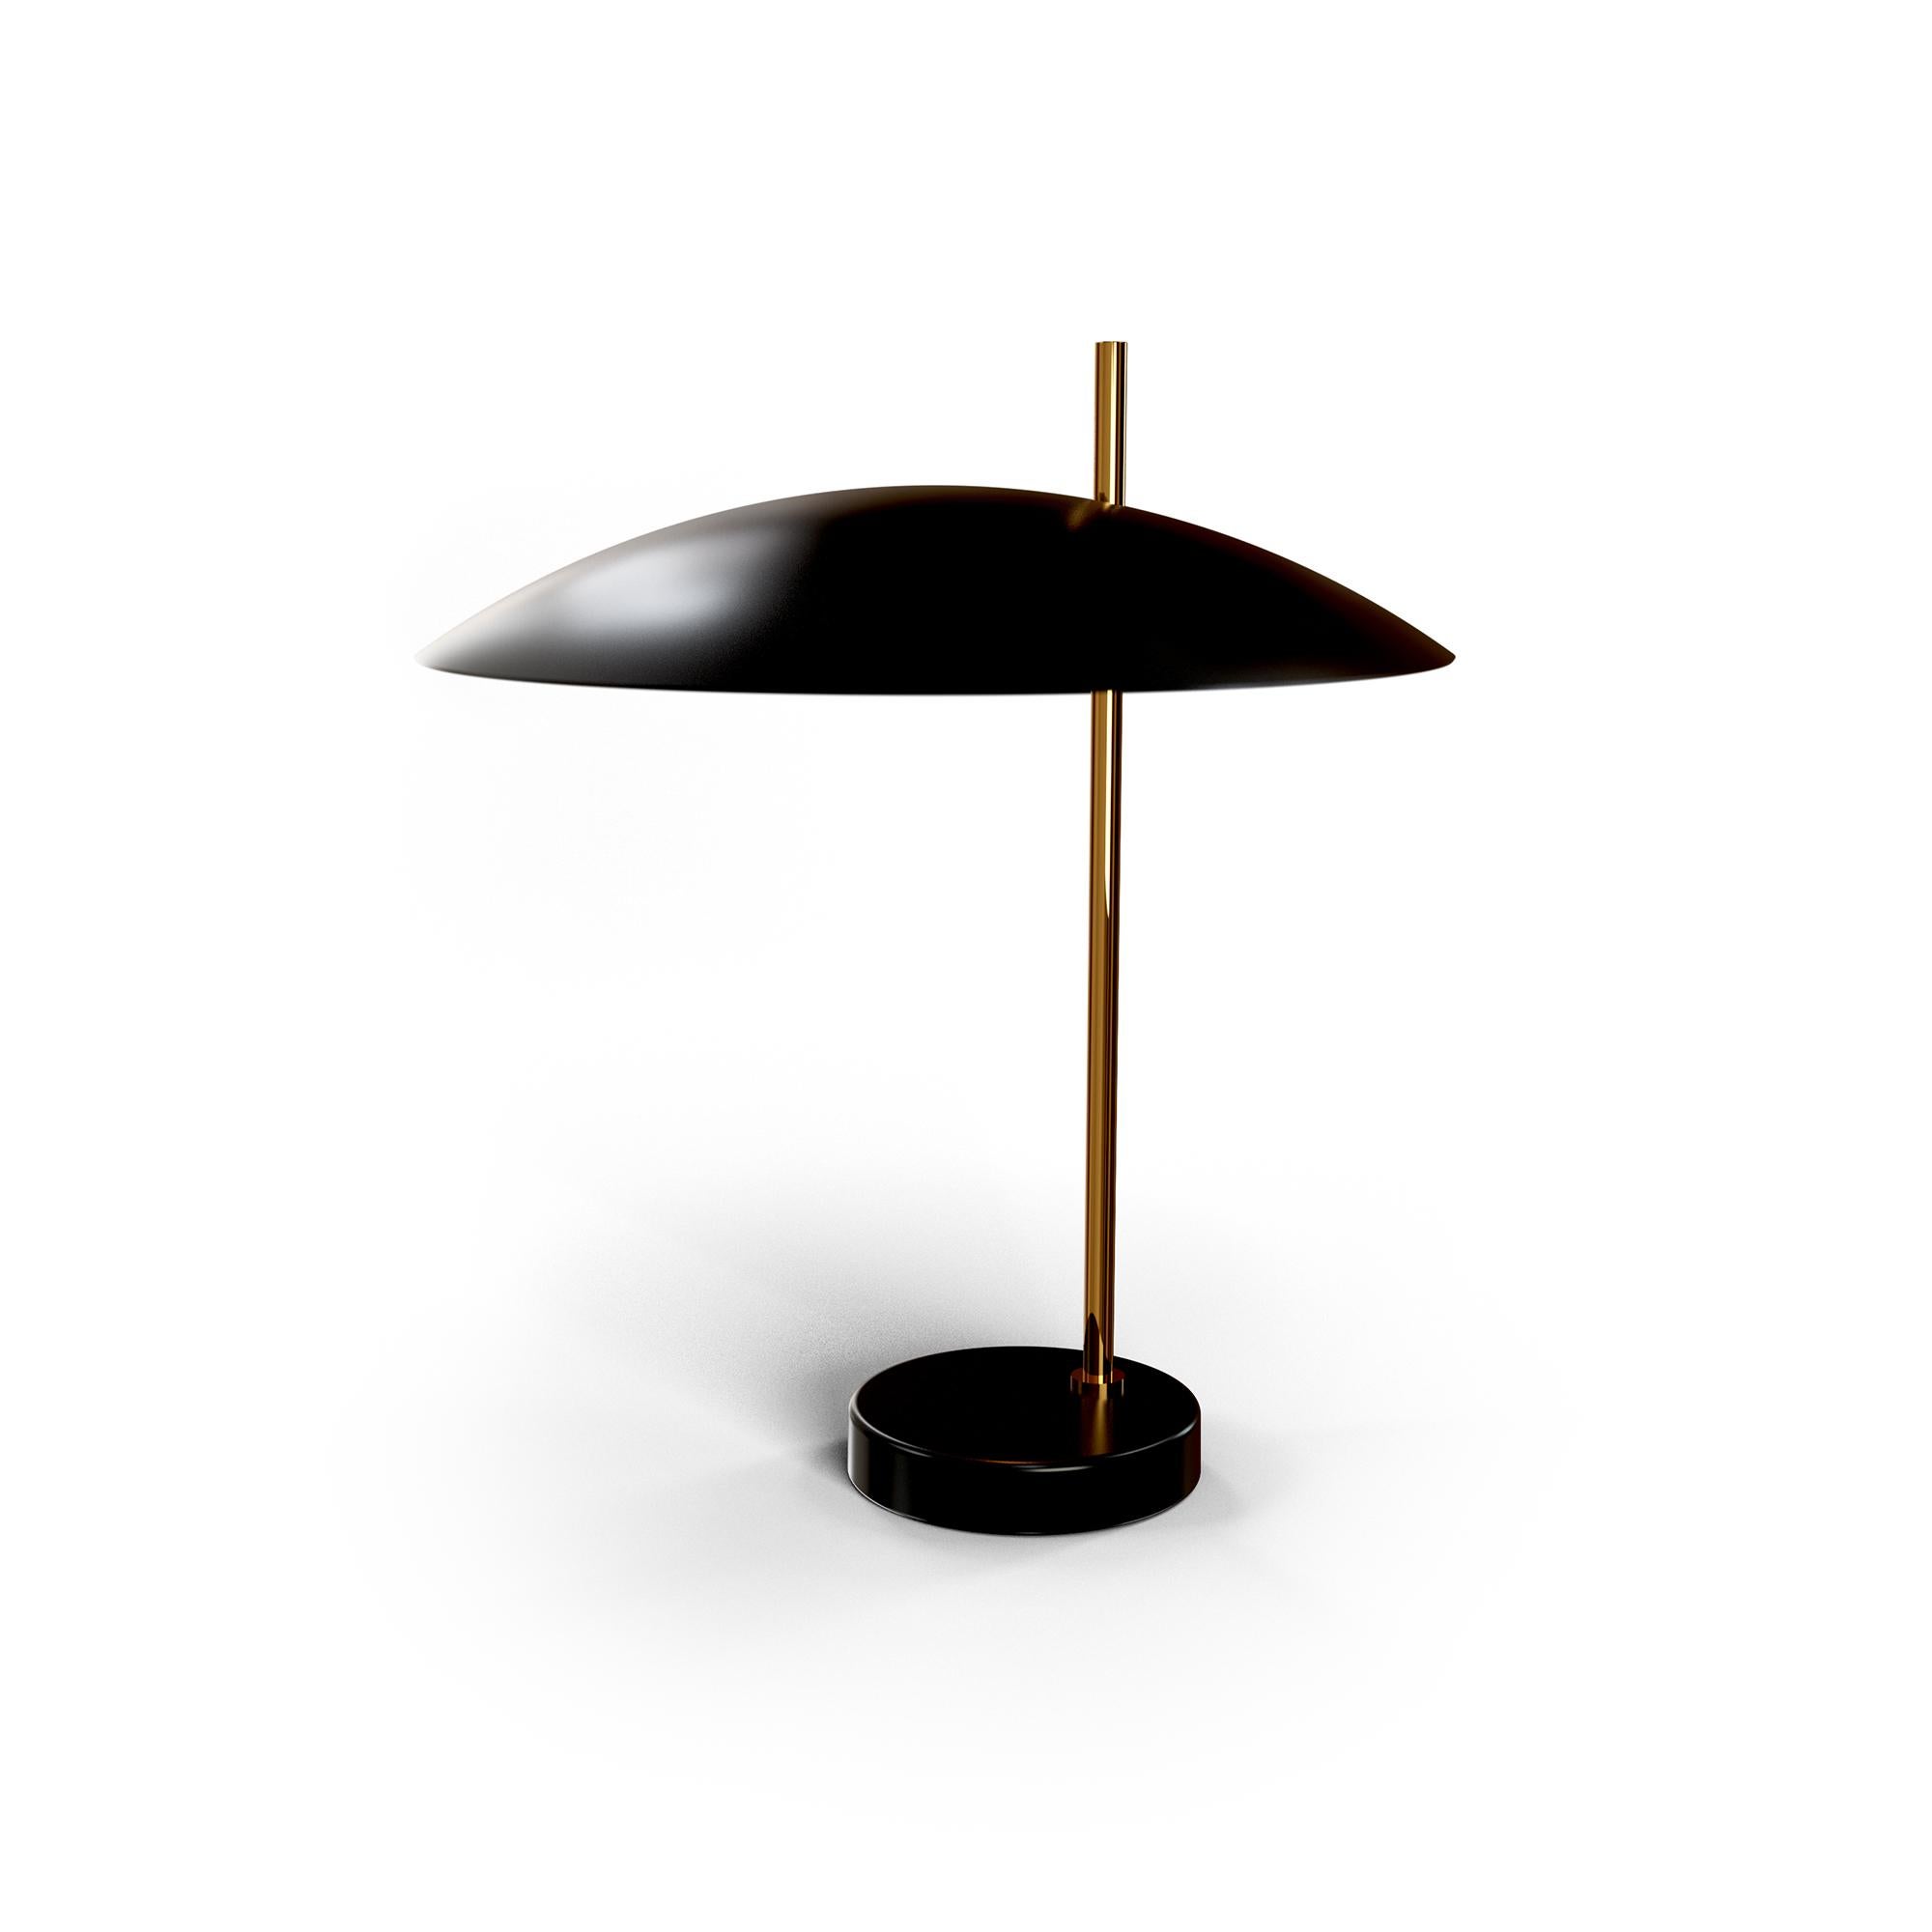 Golden Brass 1013 Table Lamp by Disderot
Limited Edition. 
Designed by Pierre Disderot.
Dimensions: Ø 34,1 x H 39,77 cm.
Materials: Golden brass and black metal.

Delivered with authentication certificate. Made in France. Available in brushed brass,